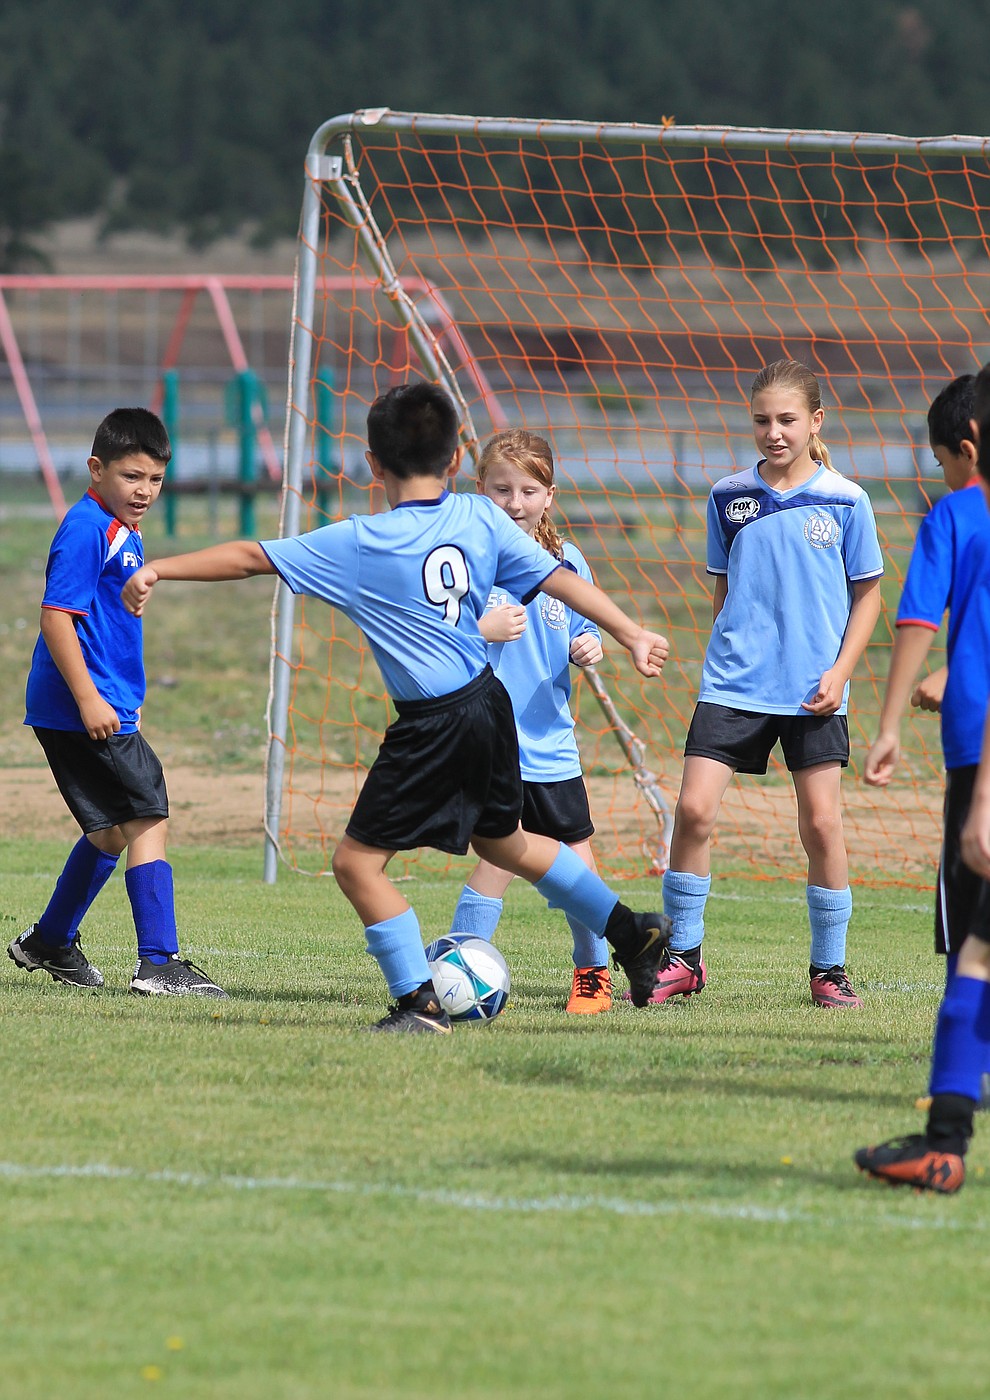 Williams AYSO players wdefend the goal in a game against Flagstaff July 14 at the WEMS field.